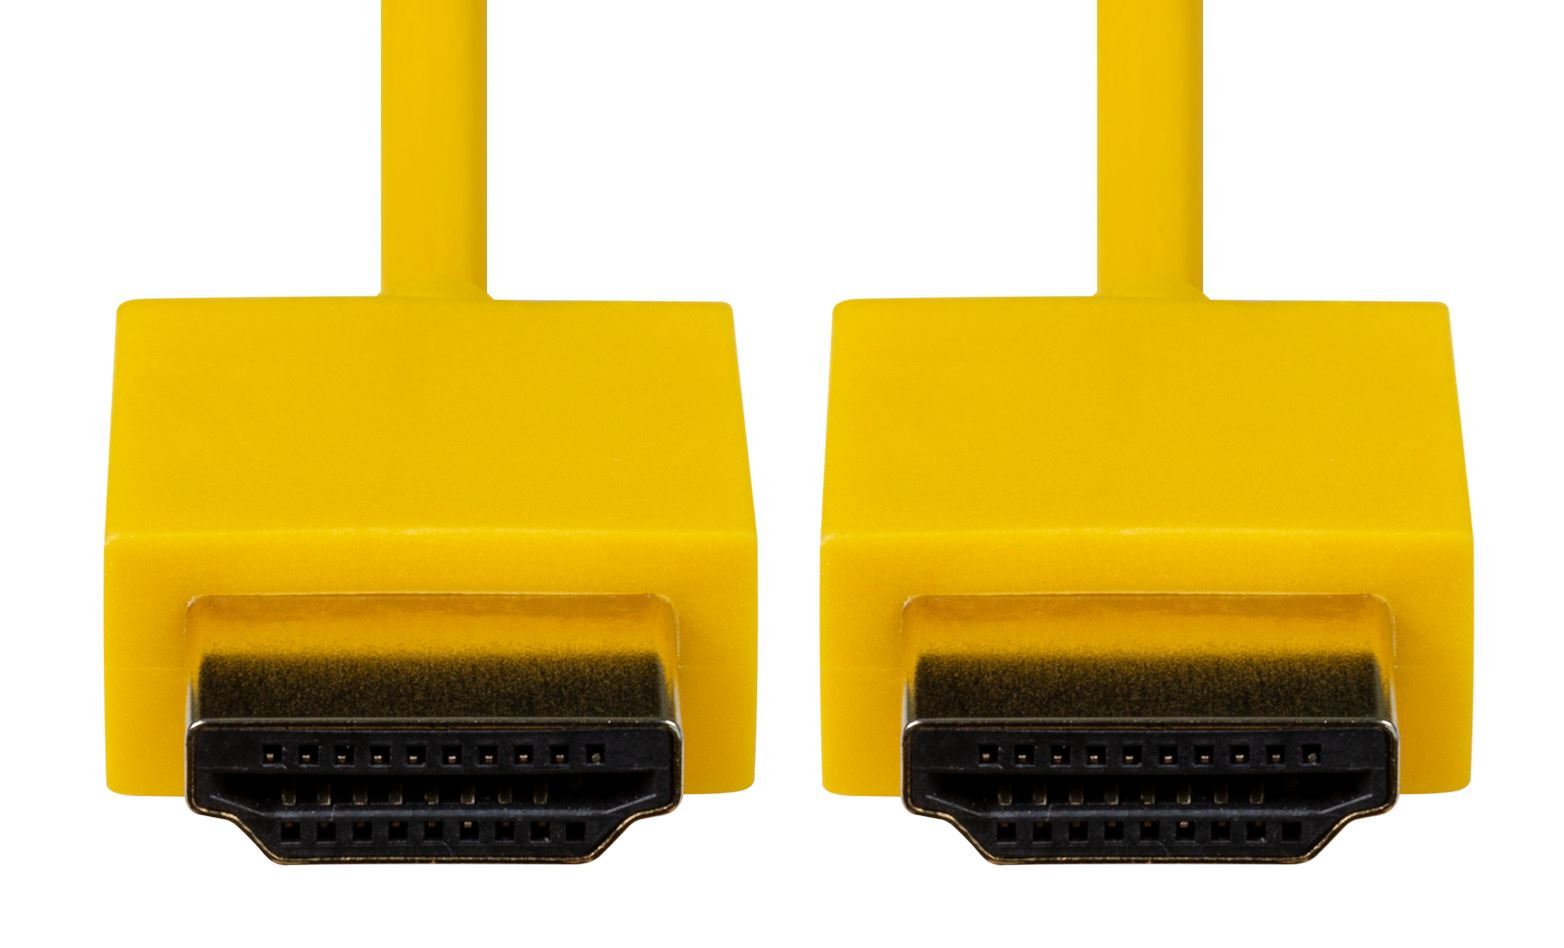 DYNAMIX_3M_HDMI_YELLOW_Nano_High_Speed_With_Ethernet_Cable._Designed_for_UHD_Display_up_to_4K2K@60Hz._Slimline_Robust_Cable._Supports_CEC_2.0,_3D,_&_ARC._Supports_Up_to_32_July_ON_SALE_-_Up_to_50%_OFF 809